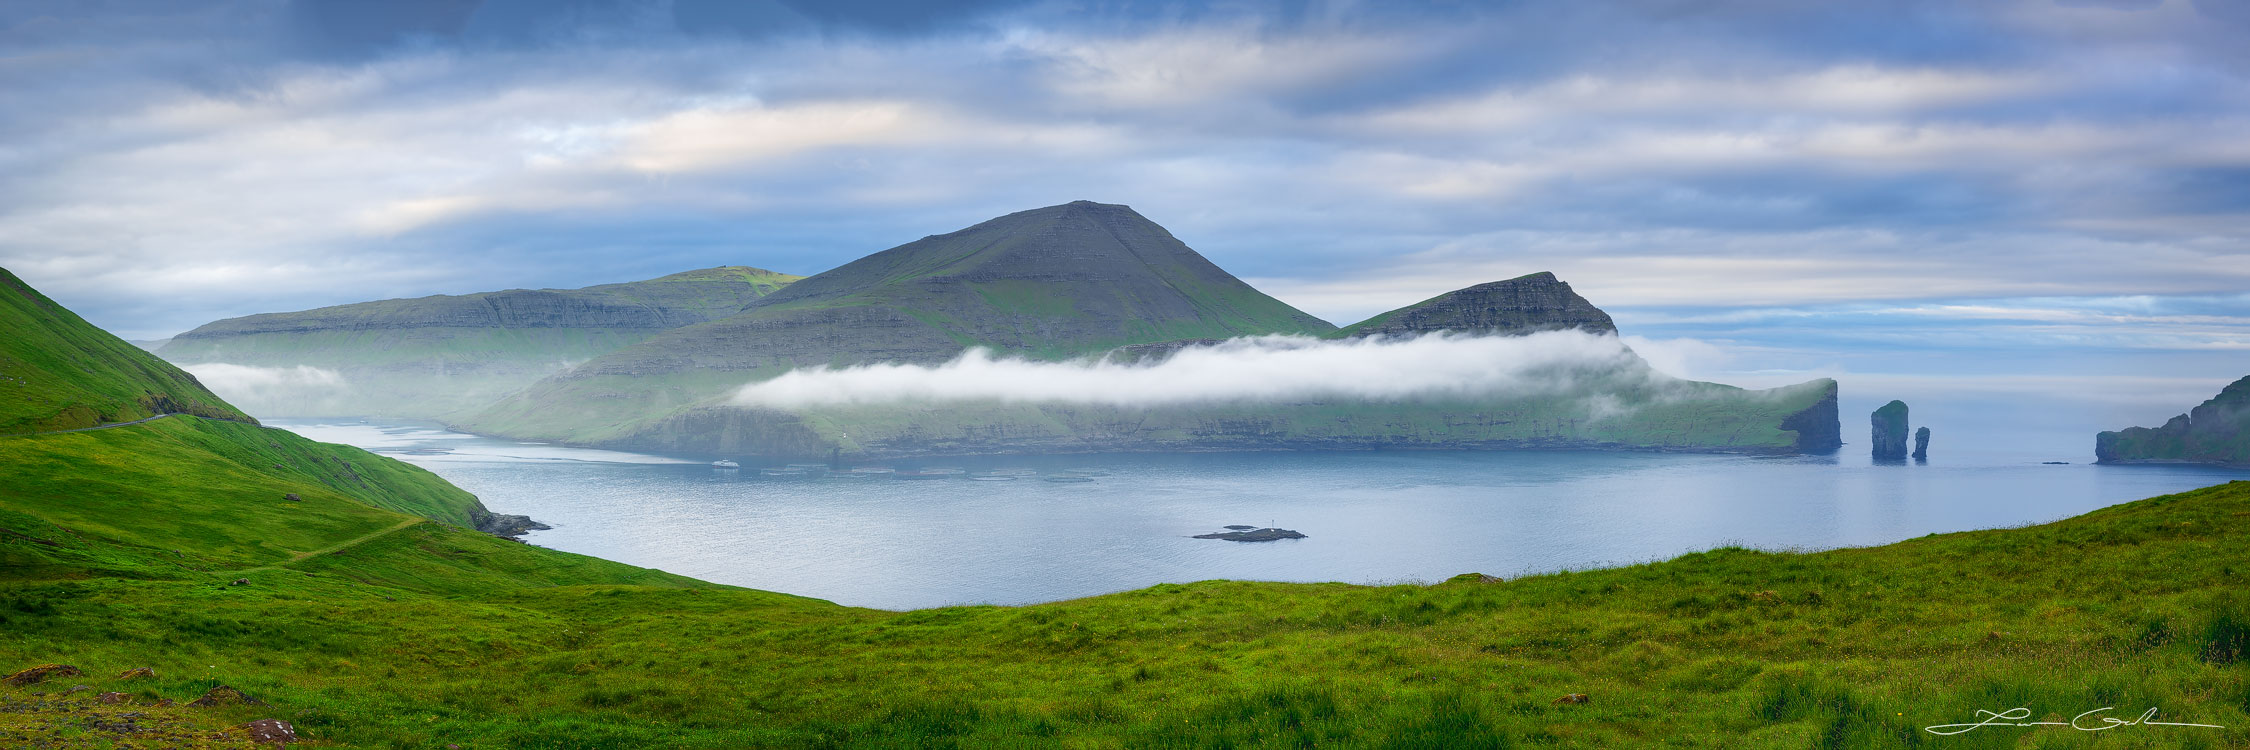 A beautiful fjord surrounded by green lush mountains and some fog - Faroe Islands - Gintchin Fine Art